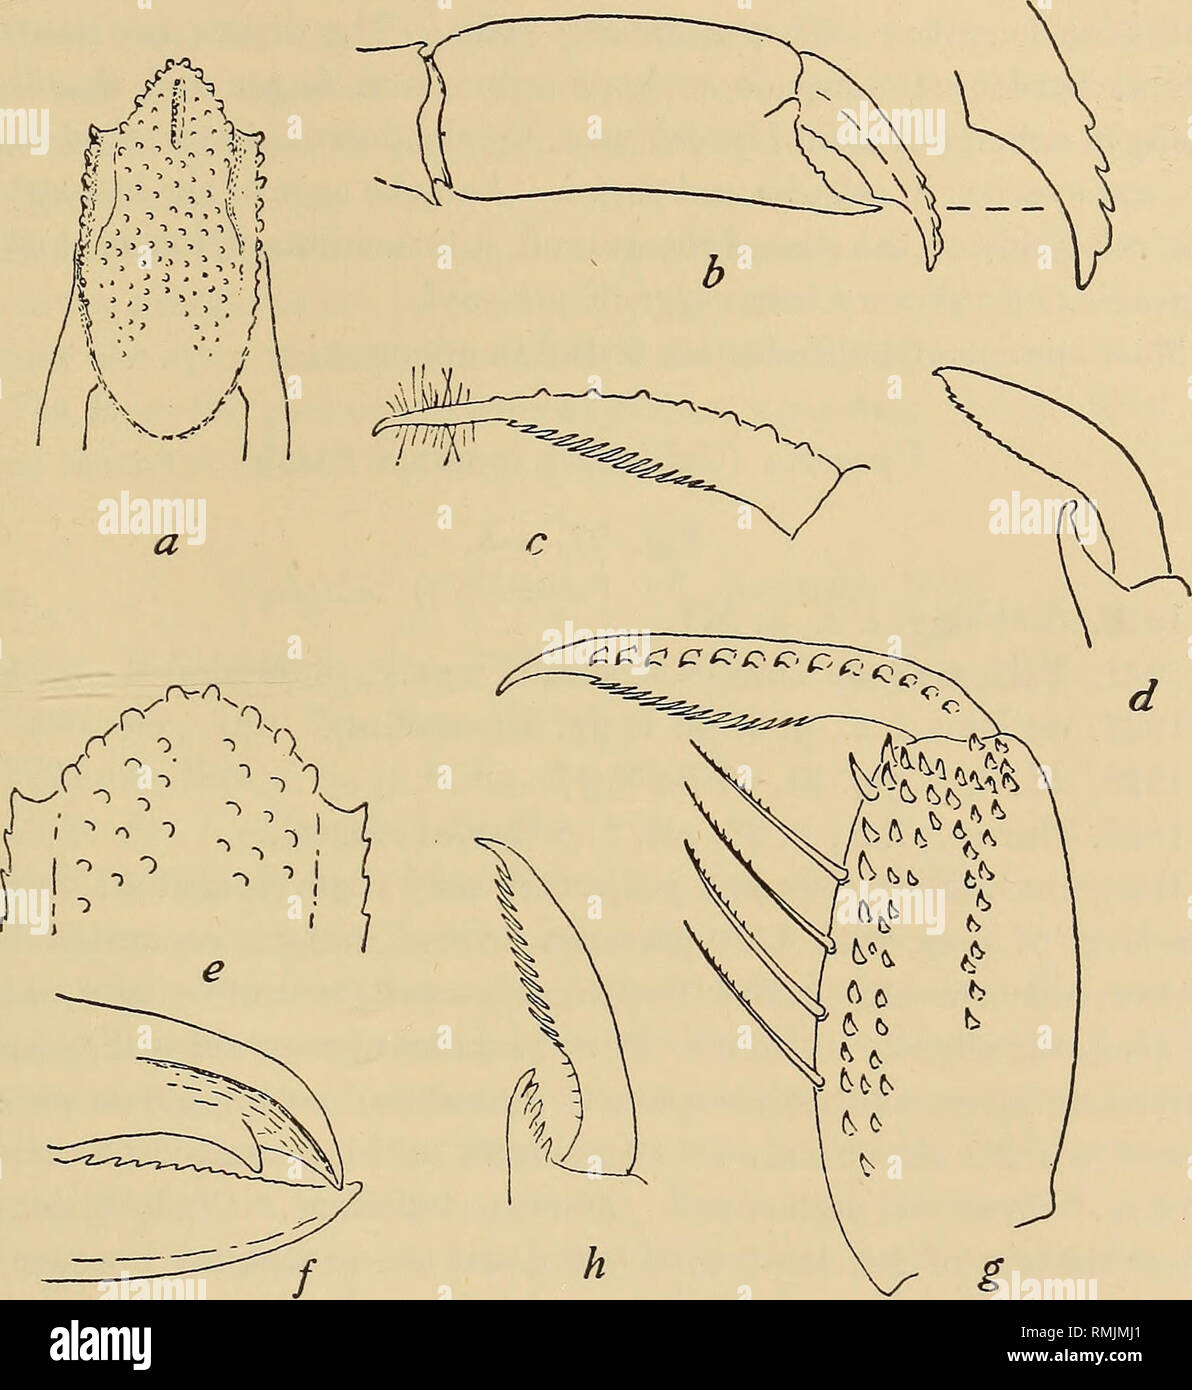 . Annals of the South African Museum = Annale van die Suid-Afrikaanse Museum. Natural history. Descriptive Catalogue of South African Decapod Crustacea. 521 Locality.—St. Francis Bay (S. Afr. Mus.). Remarks.—Described from a single ovigerous $ returned unidentified by Stebbing, and appendages of another specimen mounted on a slide by Stebbing.. Fig. 97.—Upogebia assisi Brnrd. a, anterior part of carapace, b, outer side of hand of chela, setae omitted, with apex of finger further enlarged, c, dactyl of 3rd (and 4th) leg, only apical setae shown, d, apex of 6th joint and dactyl of 5th leg, setae Stock Photo